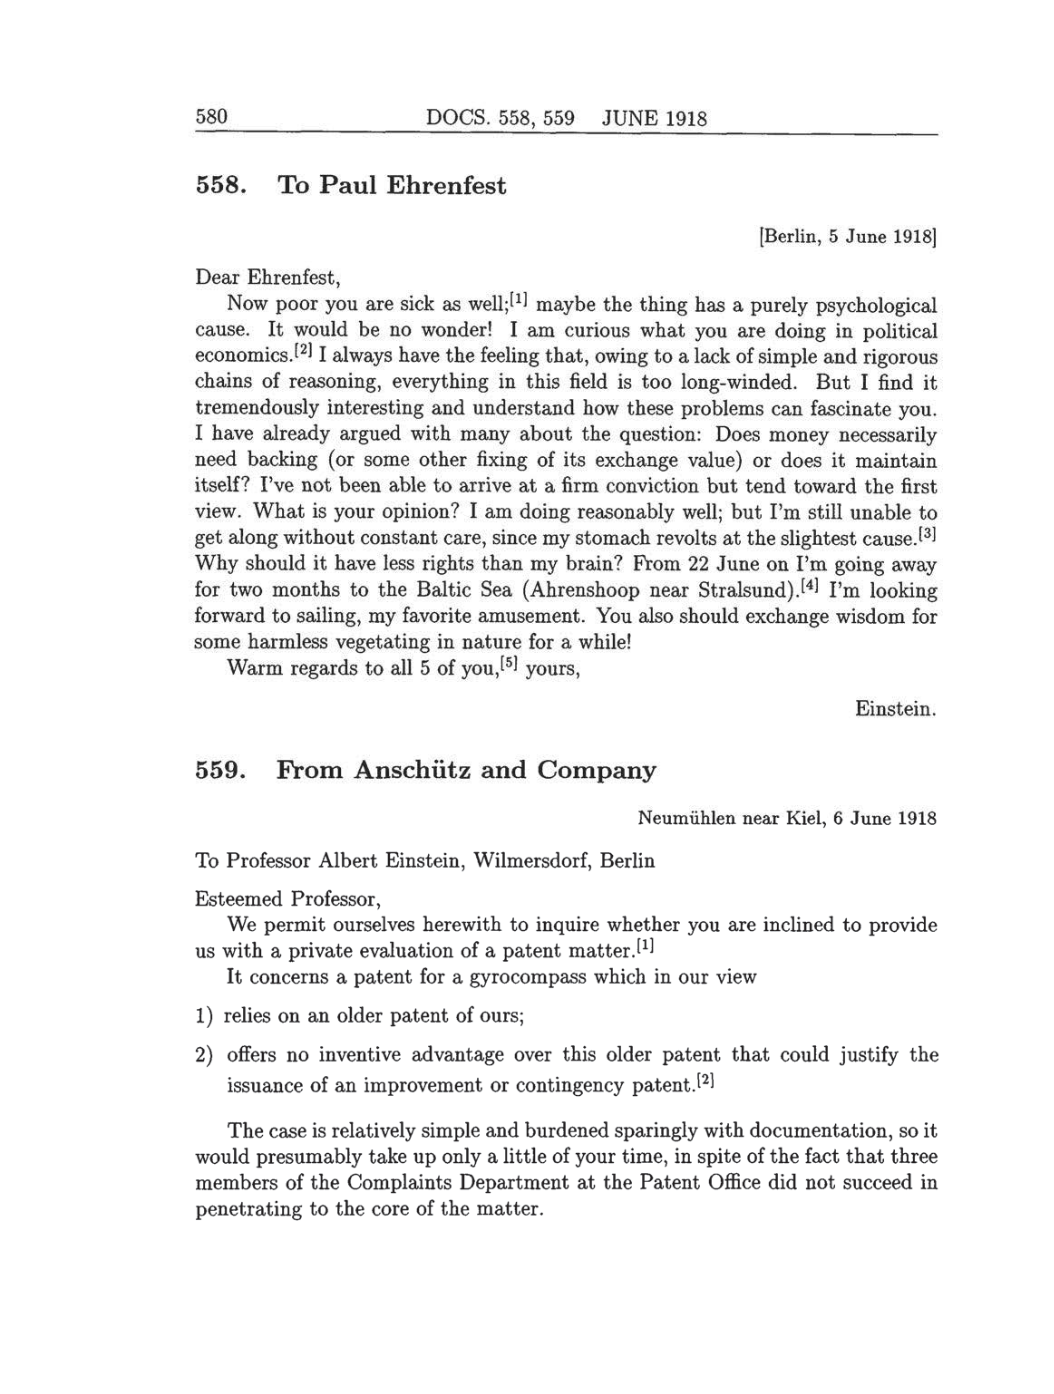 Volume 8: The Berlin Years: Correspondence, 1914-1918 (English translation supplement) page 580